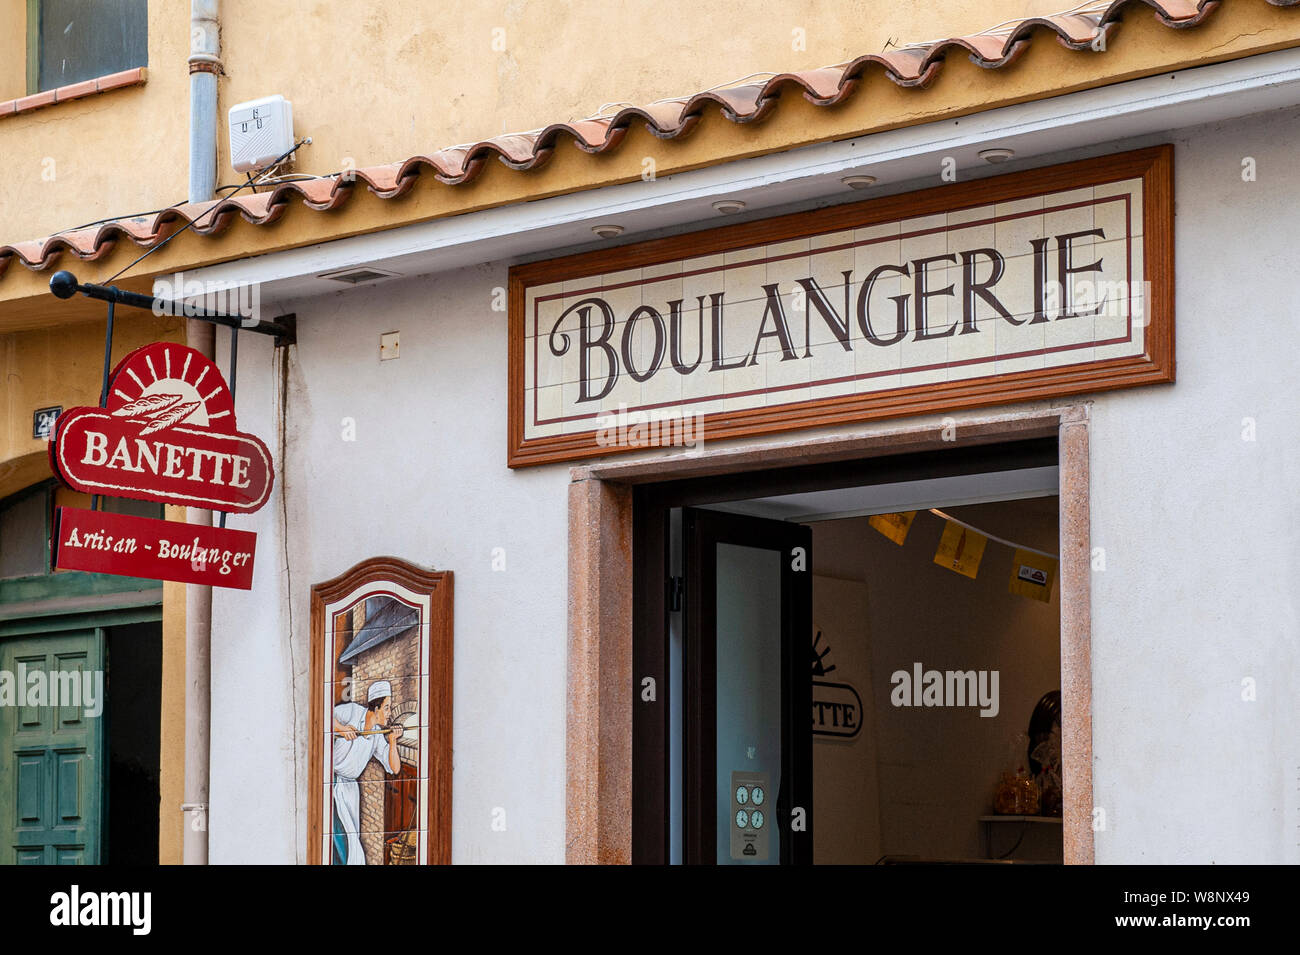 Baker's shop in Calvi, Corsica France.   This is a traditional artisan boulangerie baking fresh bread daily. Stock Photo